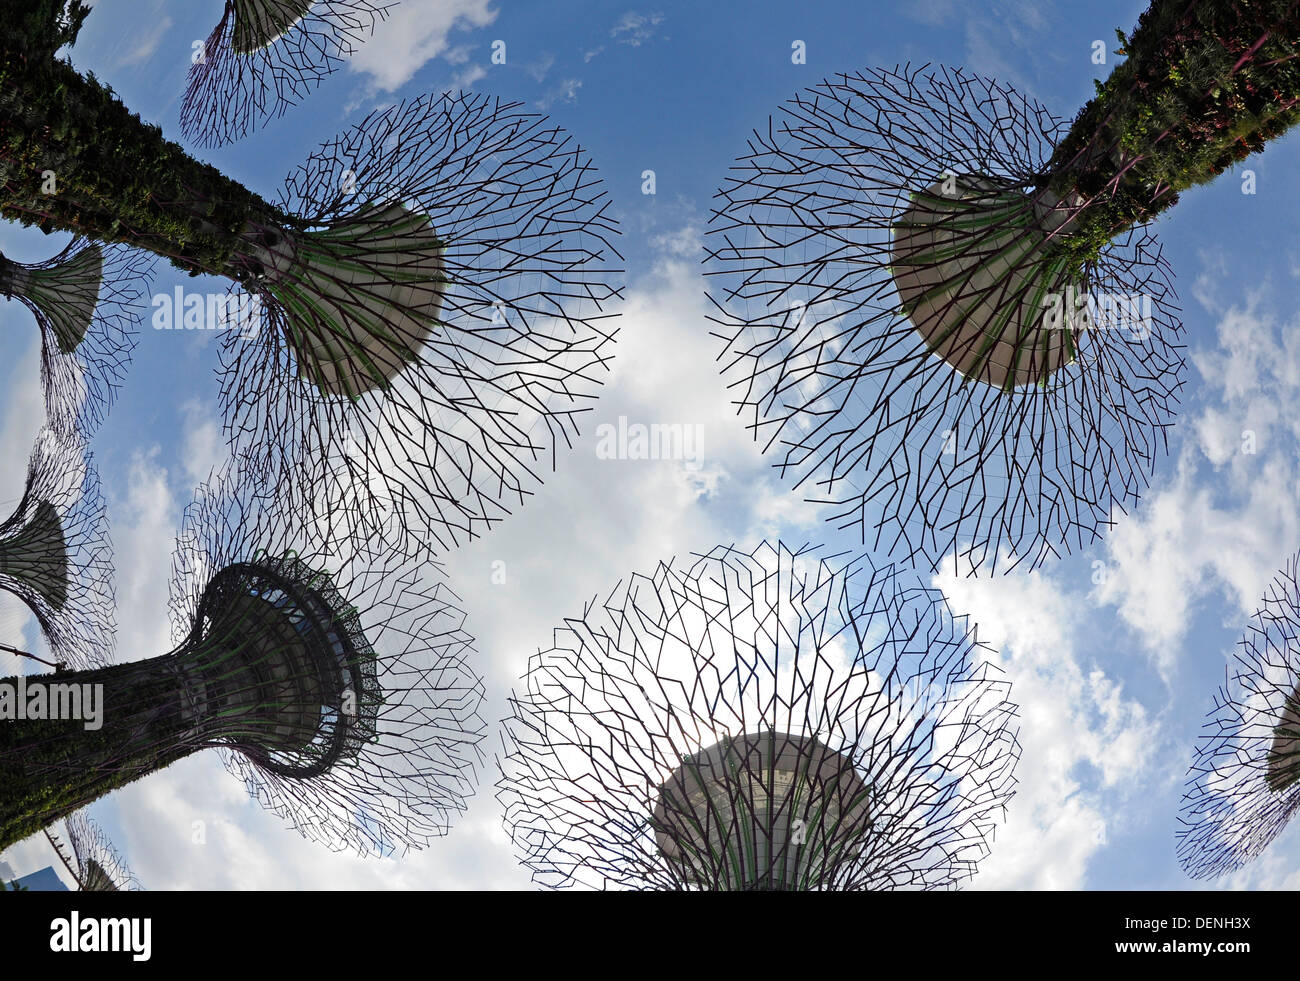 Steel and concrete tree like structures form the Supertree Grove, at the Gardens by the Bay in Singapore. Stock Photo